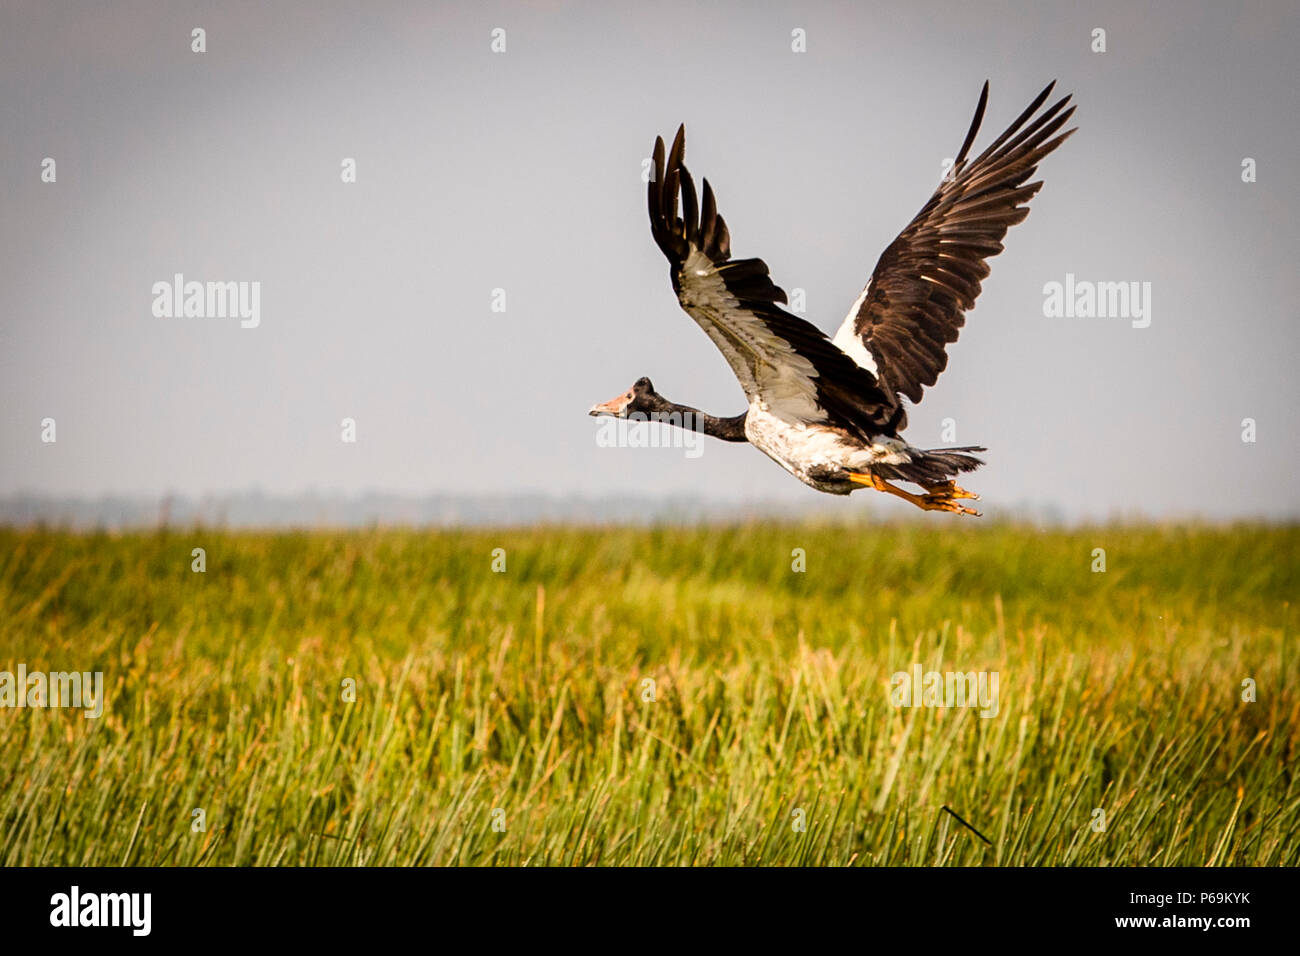 Magpie Goose of Northern Australia in flight. Excitedly the split-footed goose takes off Stock Photo